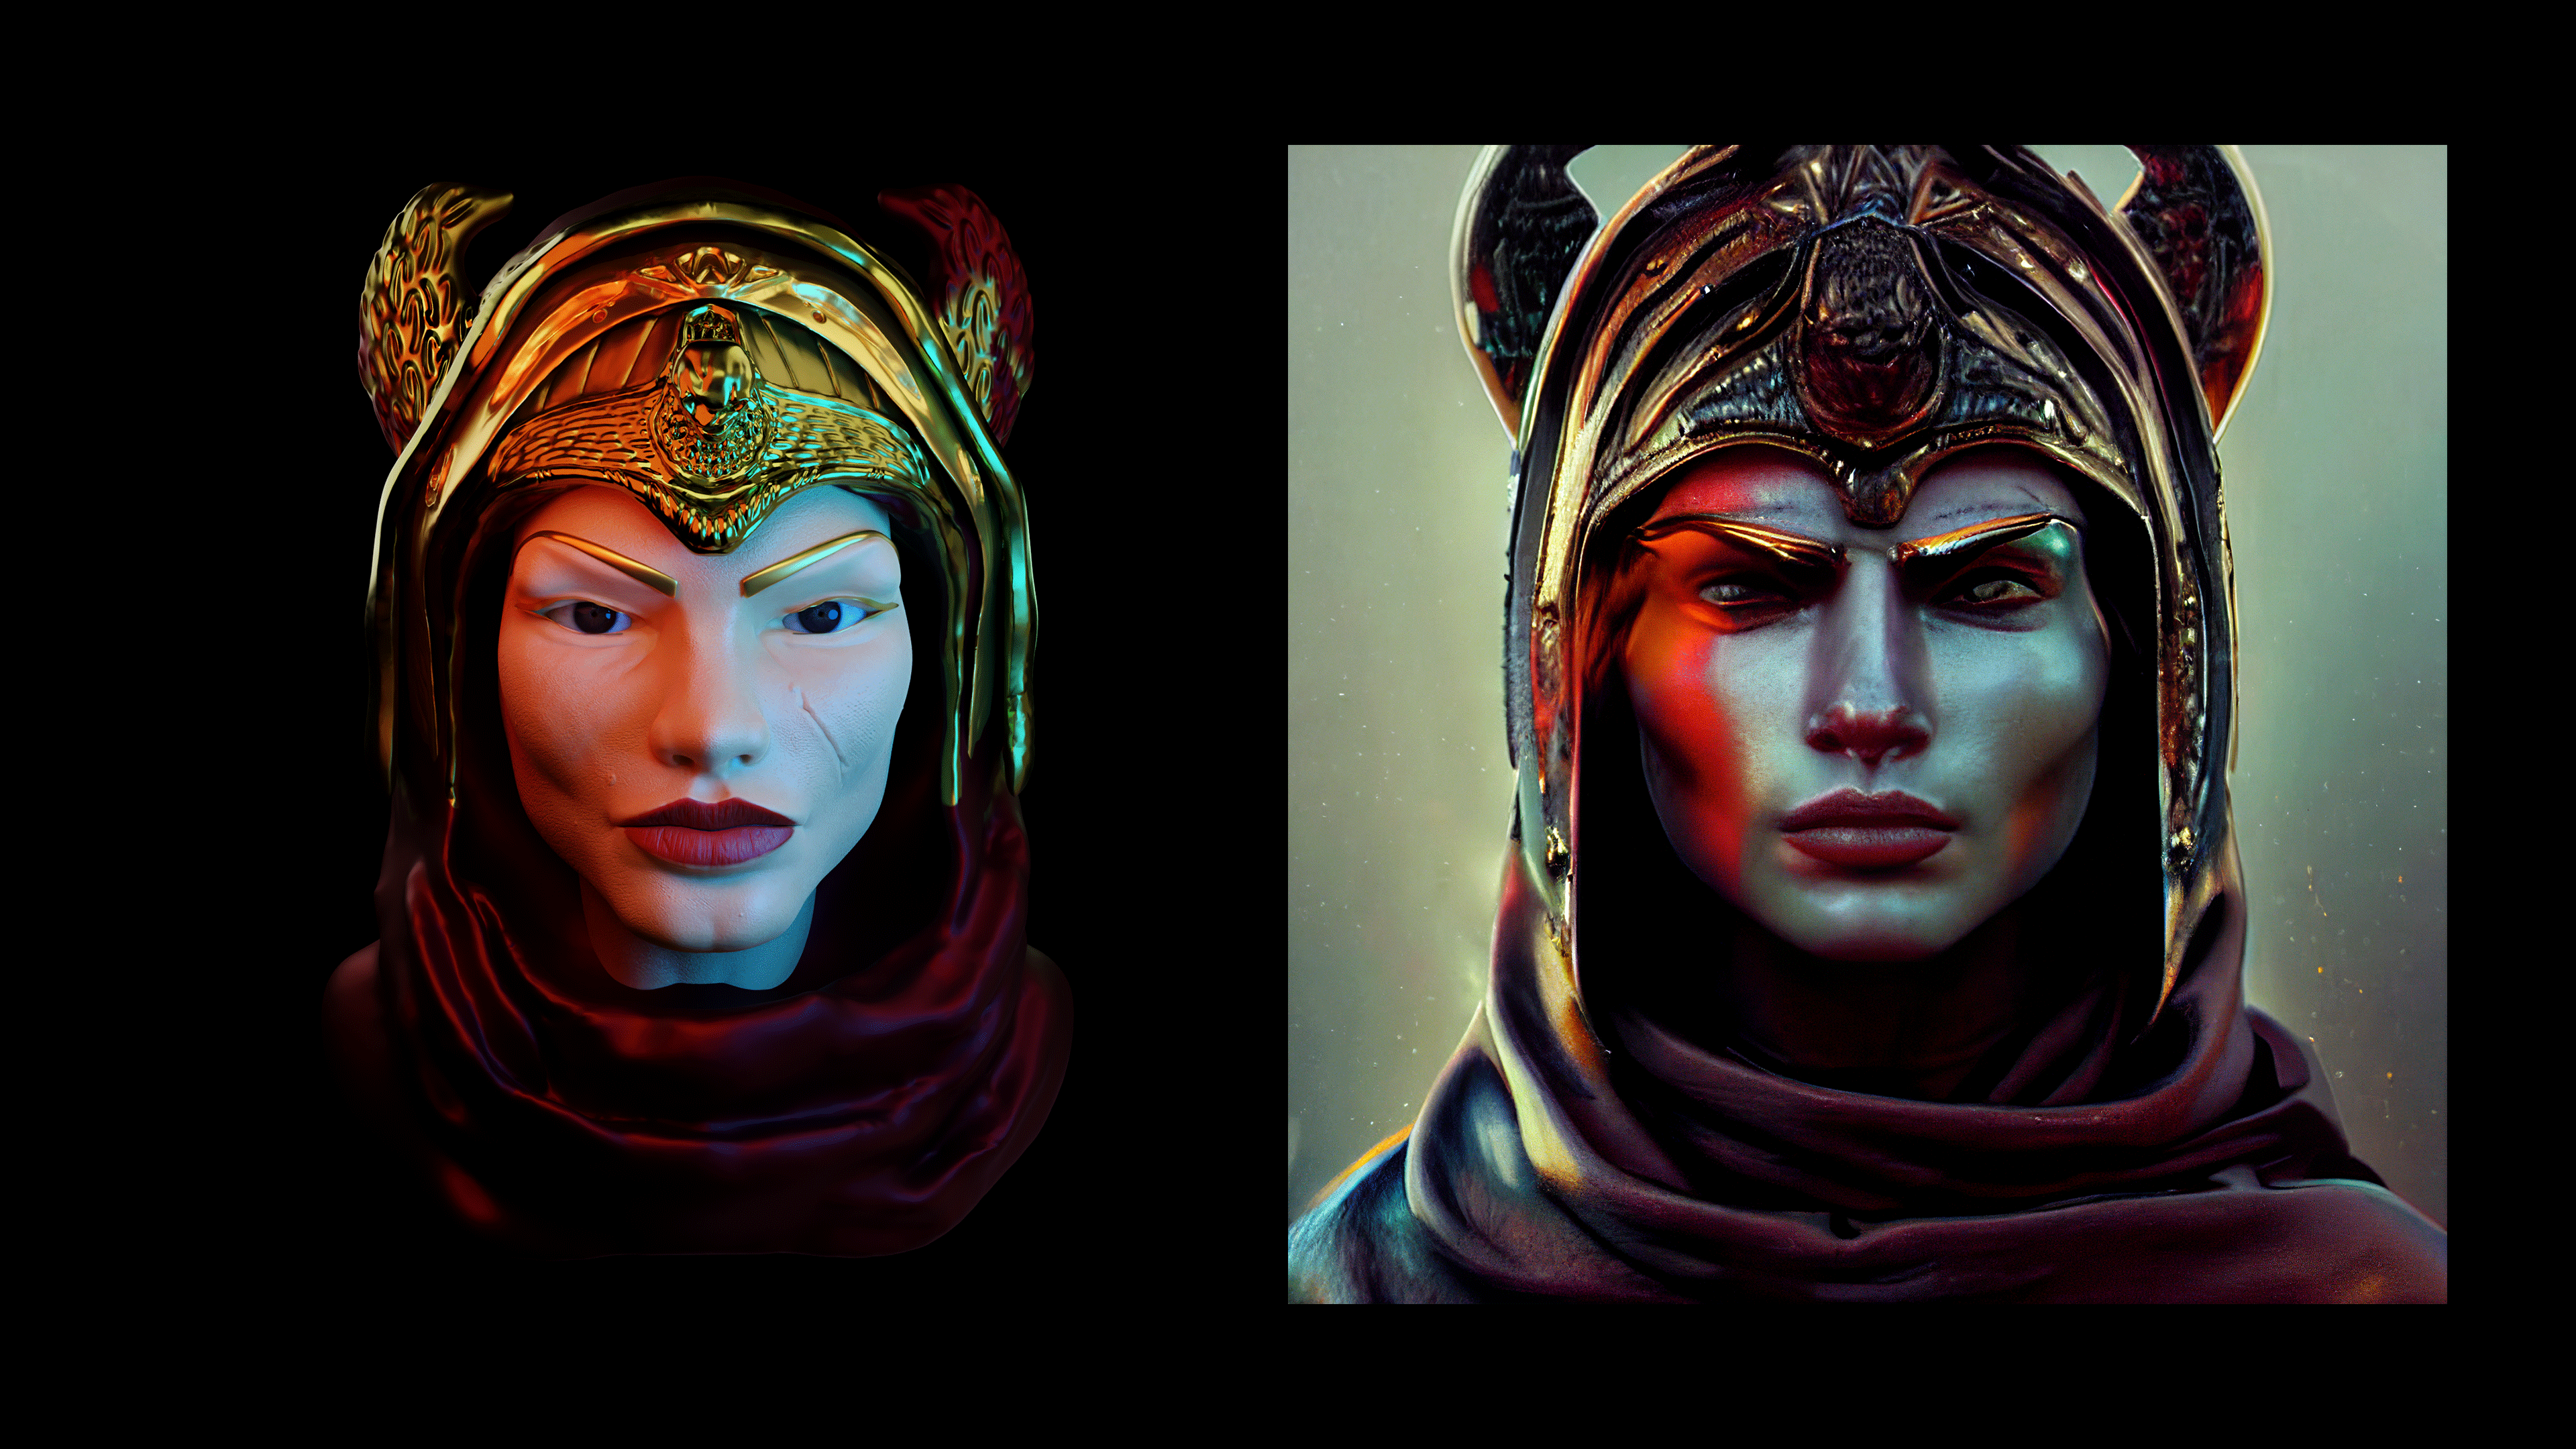 Concept and Final render side by side. The concept art was produced using Stable Diffusion on my own machine.